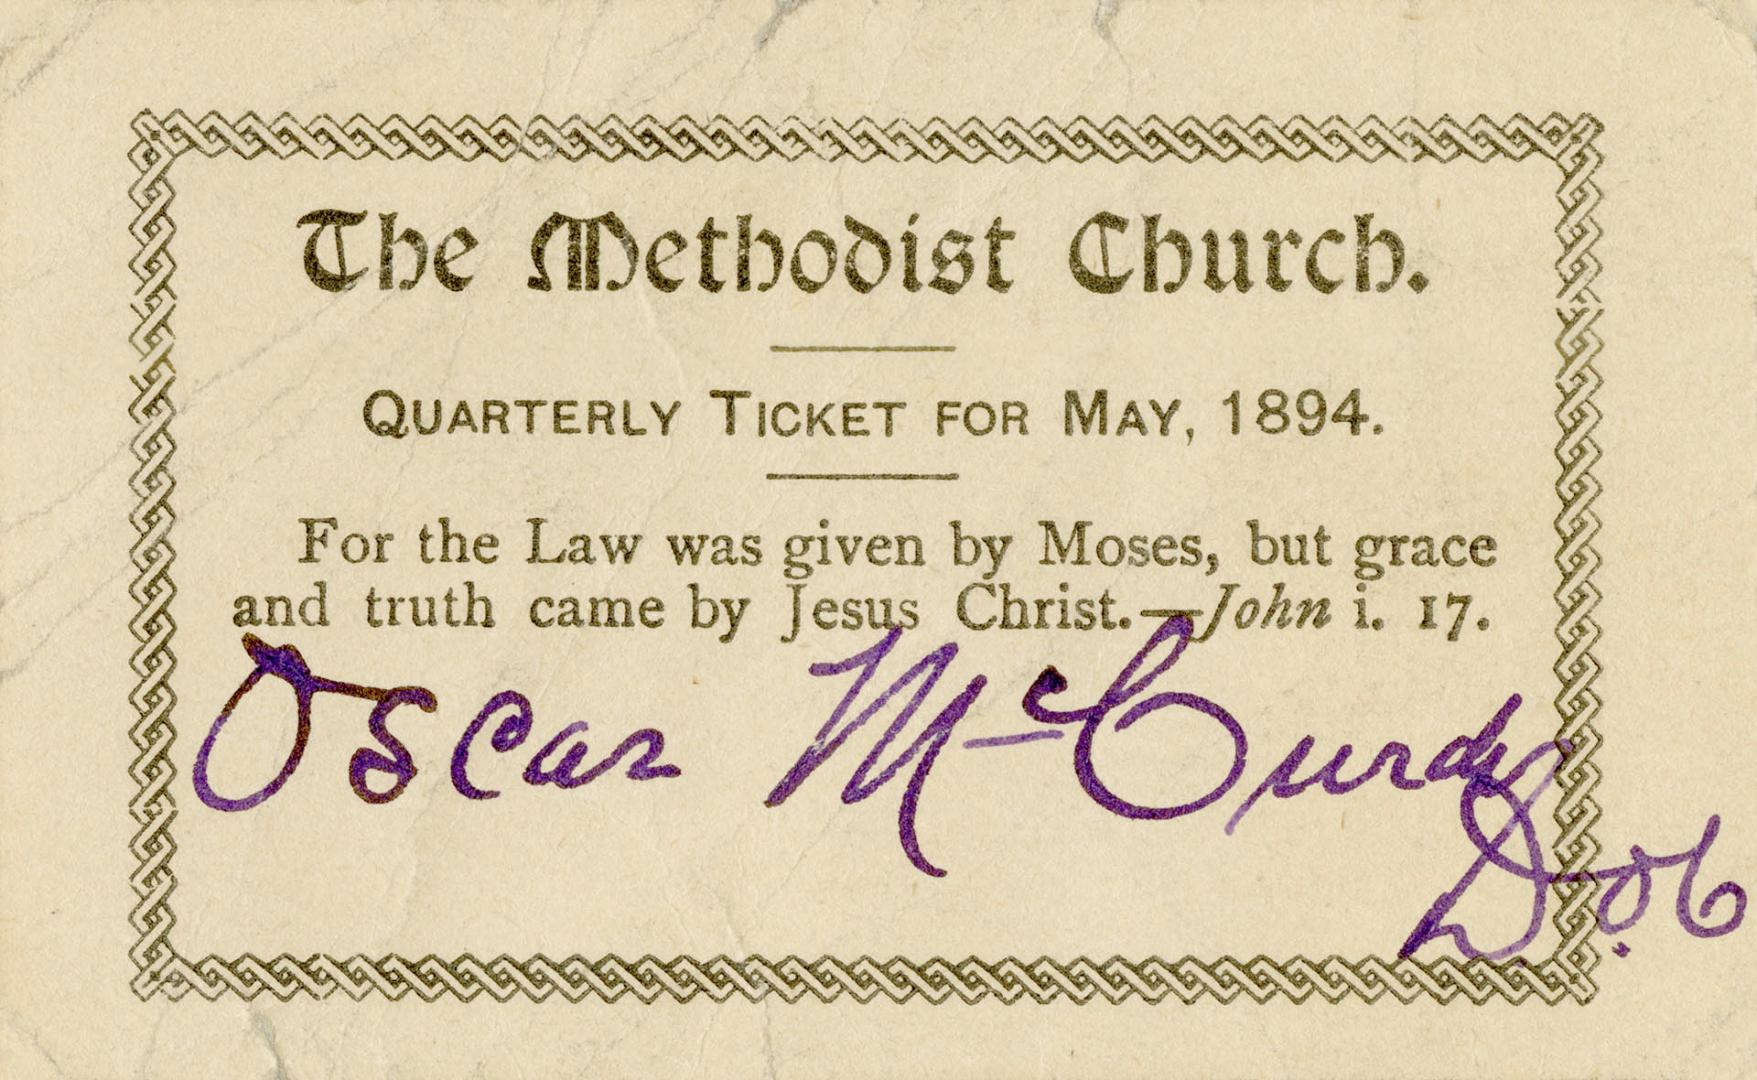 Methodist Church Quarterly Ticket For May, 1894